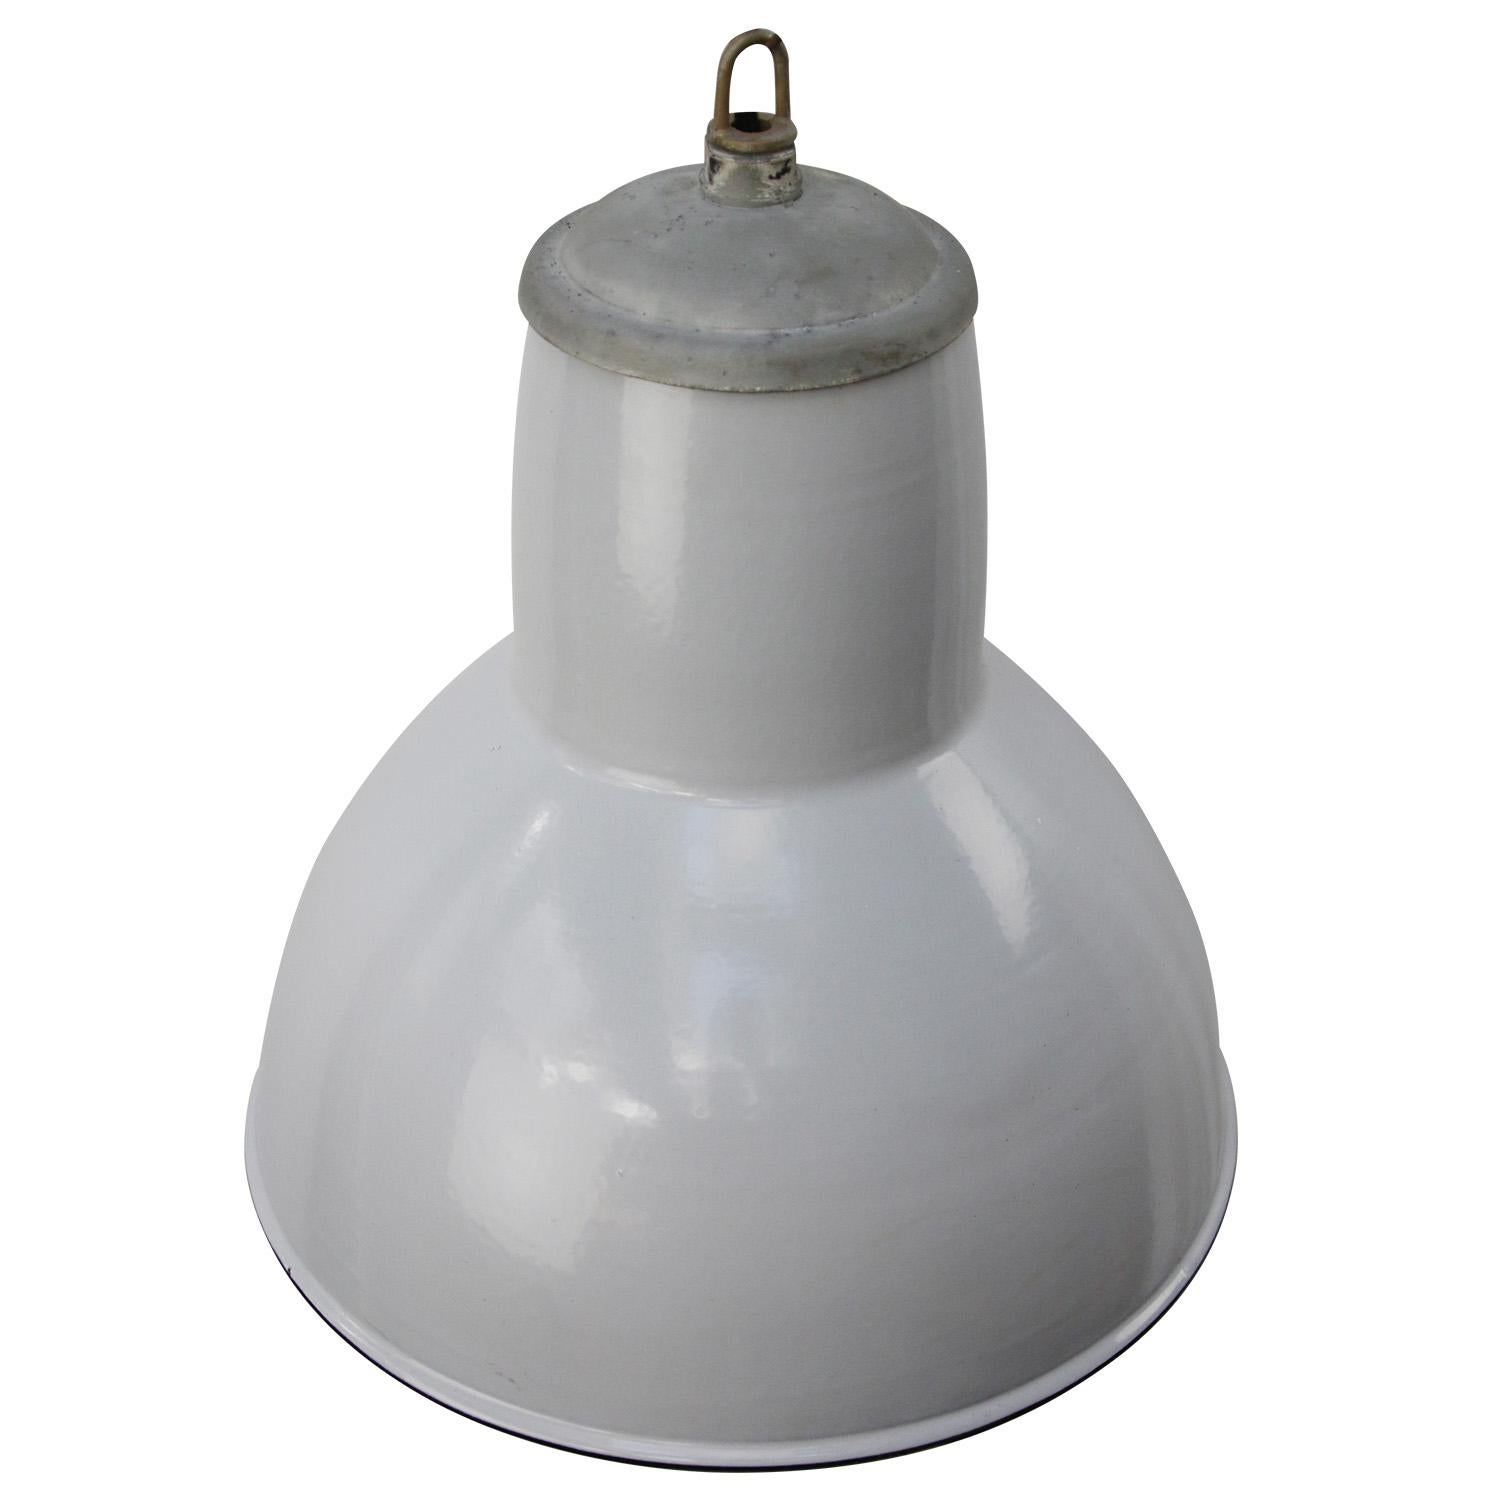 Dutch grey industrial factory light by Philips
Thick quality enamel. Metal top.
Used in warehouses and factories.

E27/E26

Weight: 3.40 kg / 7.5 lb

Priced per individual item. All lamps have been made suitable by international standards